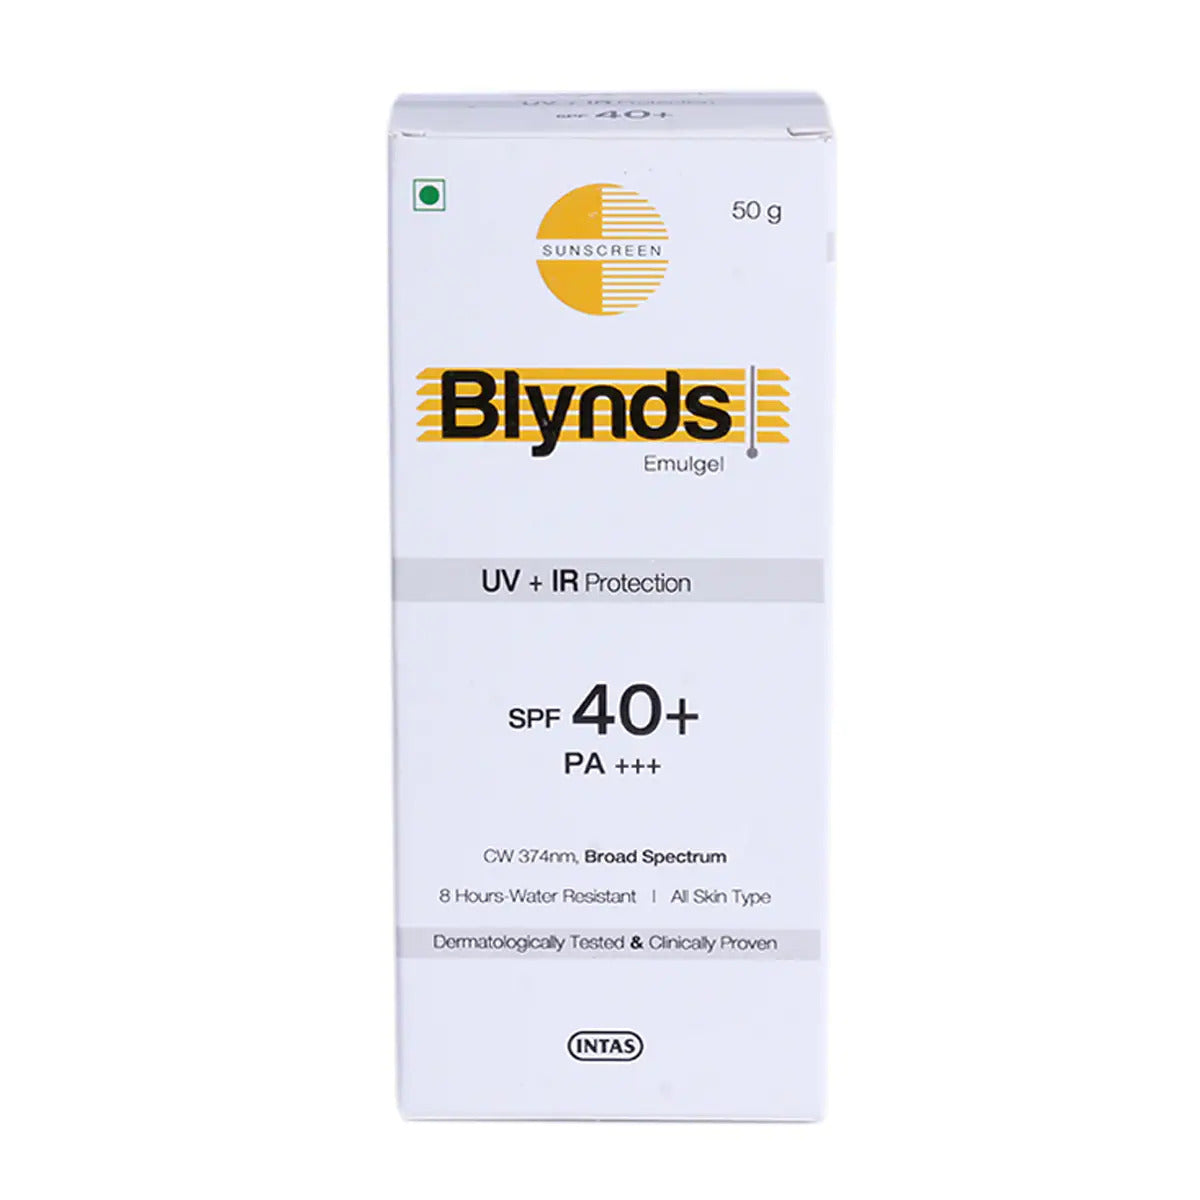 Blynds SPF 40+ Emulgel by Intas Pharmaceuticals Limited